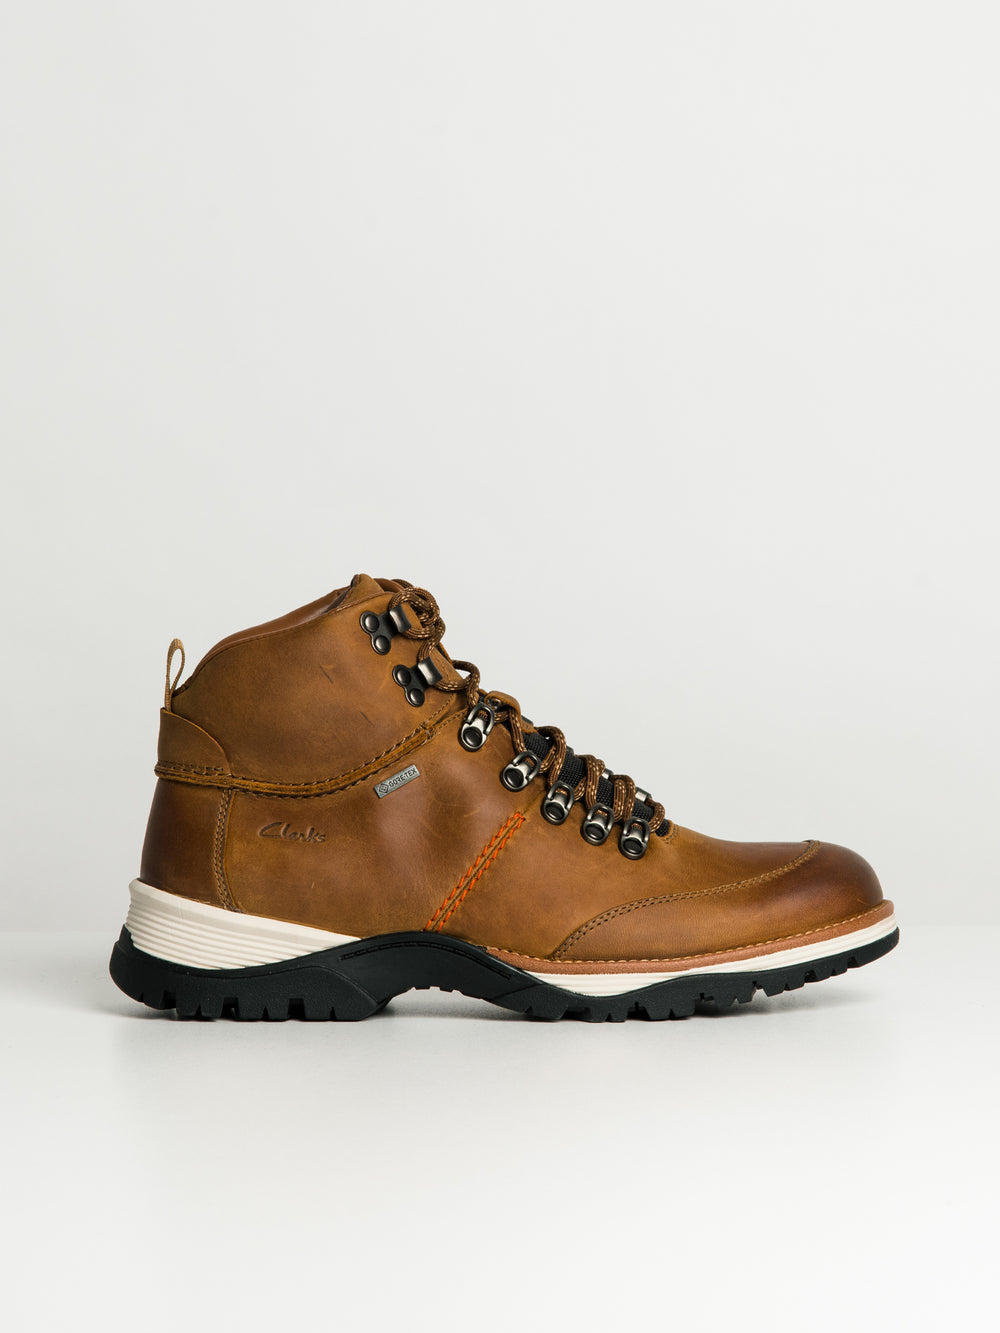 MENS CLARKS TOPTON PINE GTX BOOT - CLEARANCE